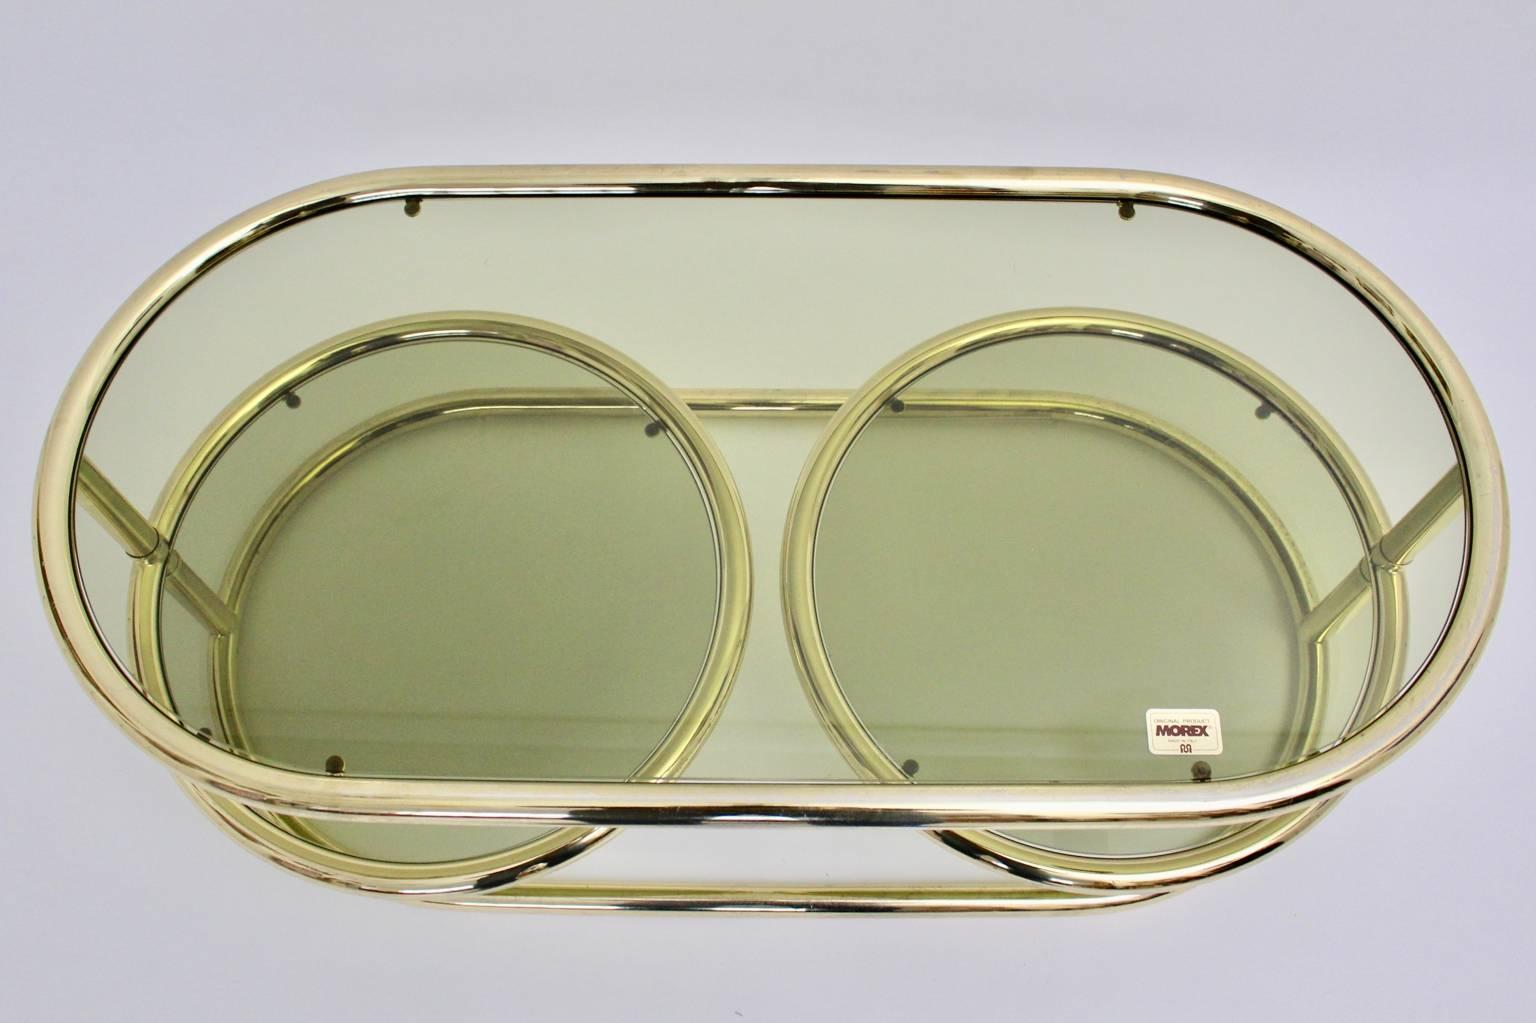 Italian Brass Swiveling Vintage Coffee Table Green Smoked Glass Plates by Morex 1970s